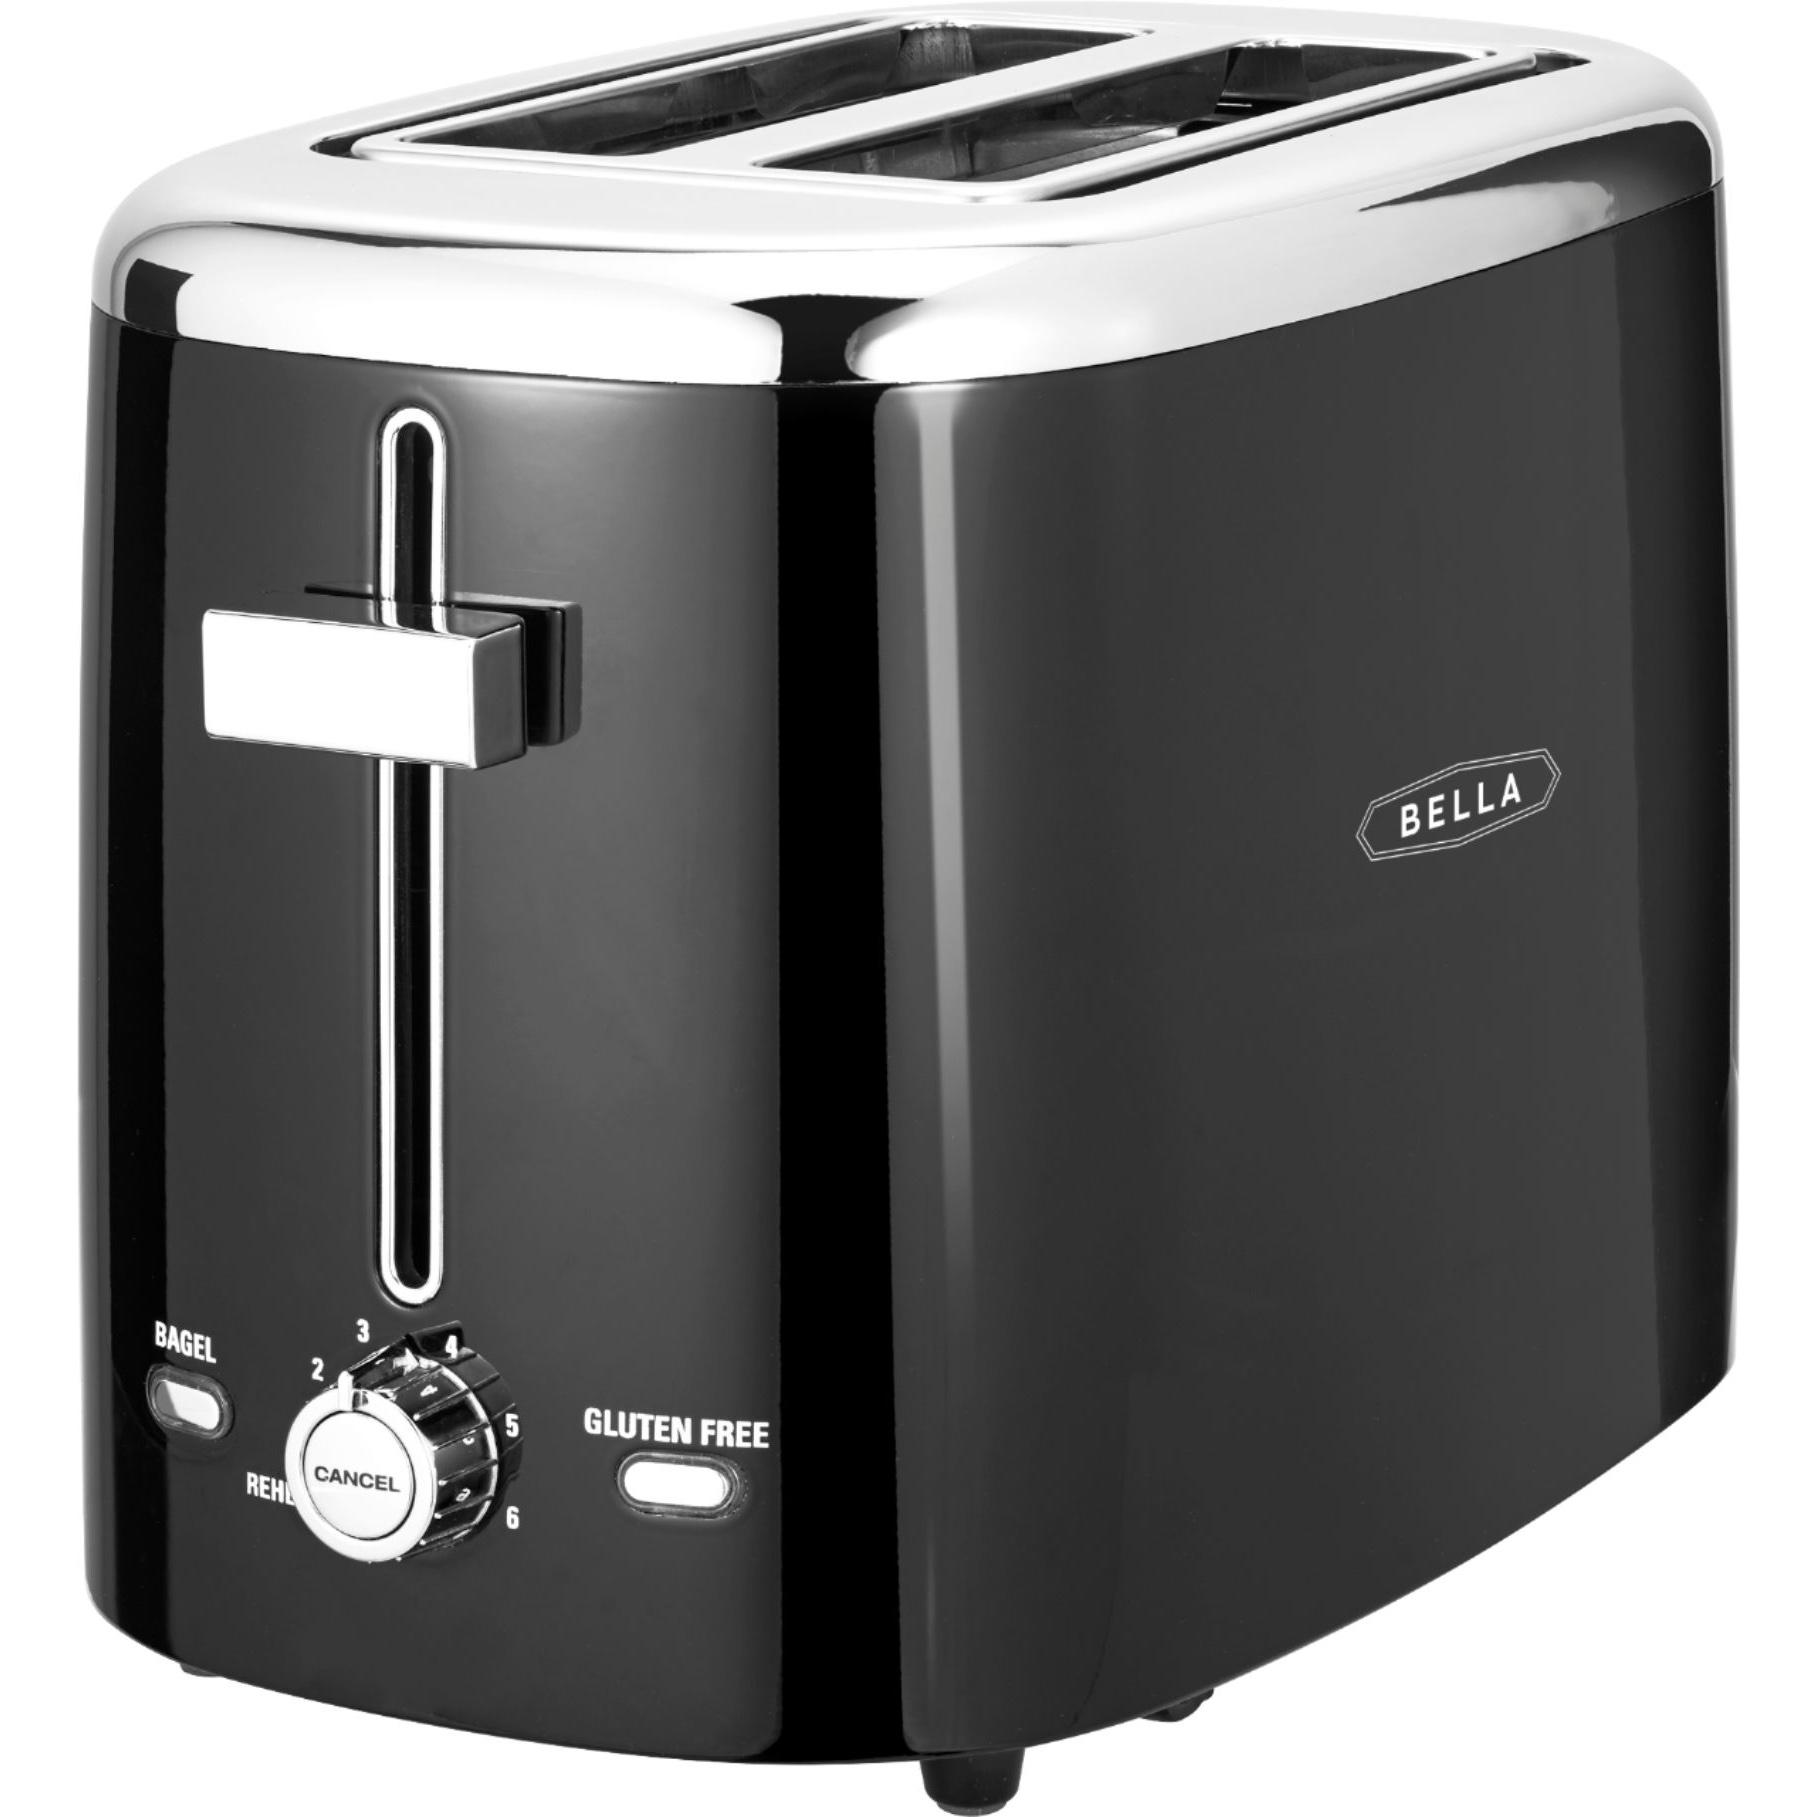 Bella 2-Slice Extra-Wide Self-Centering-Slot Toaster for $9.99